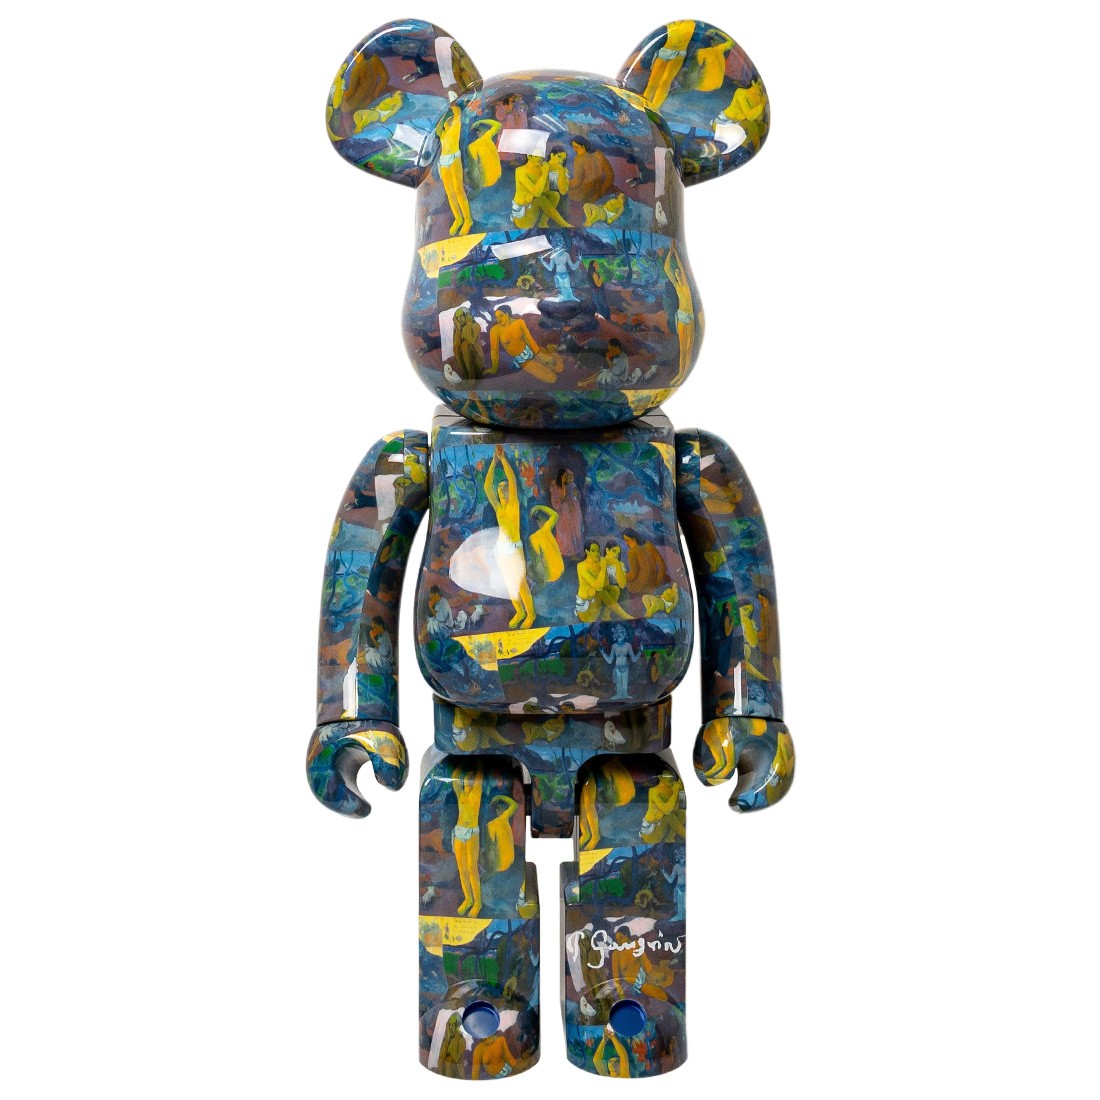 Medicom Eugene Henri Paul Gauguin Where Do We Come From? What Are We? Where Are We Going? 1000% Bearbrick Figure (blue)